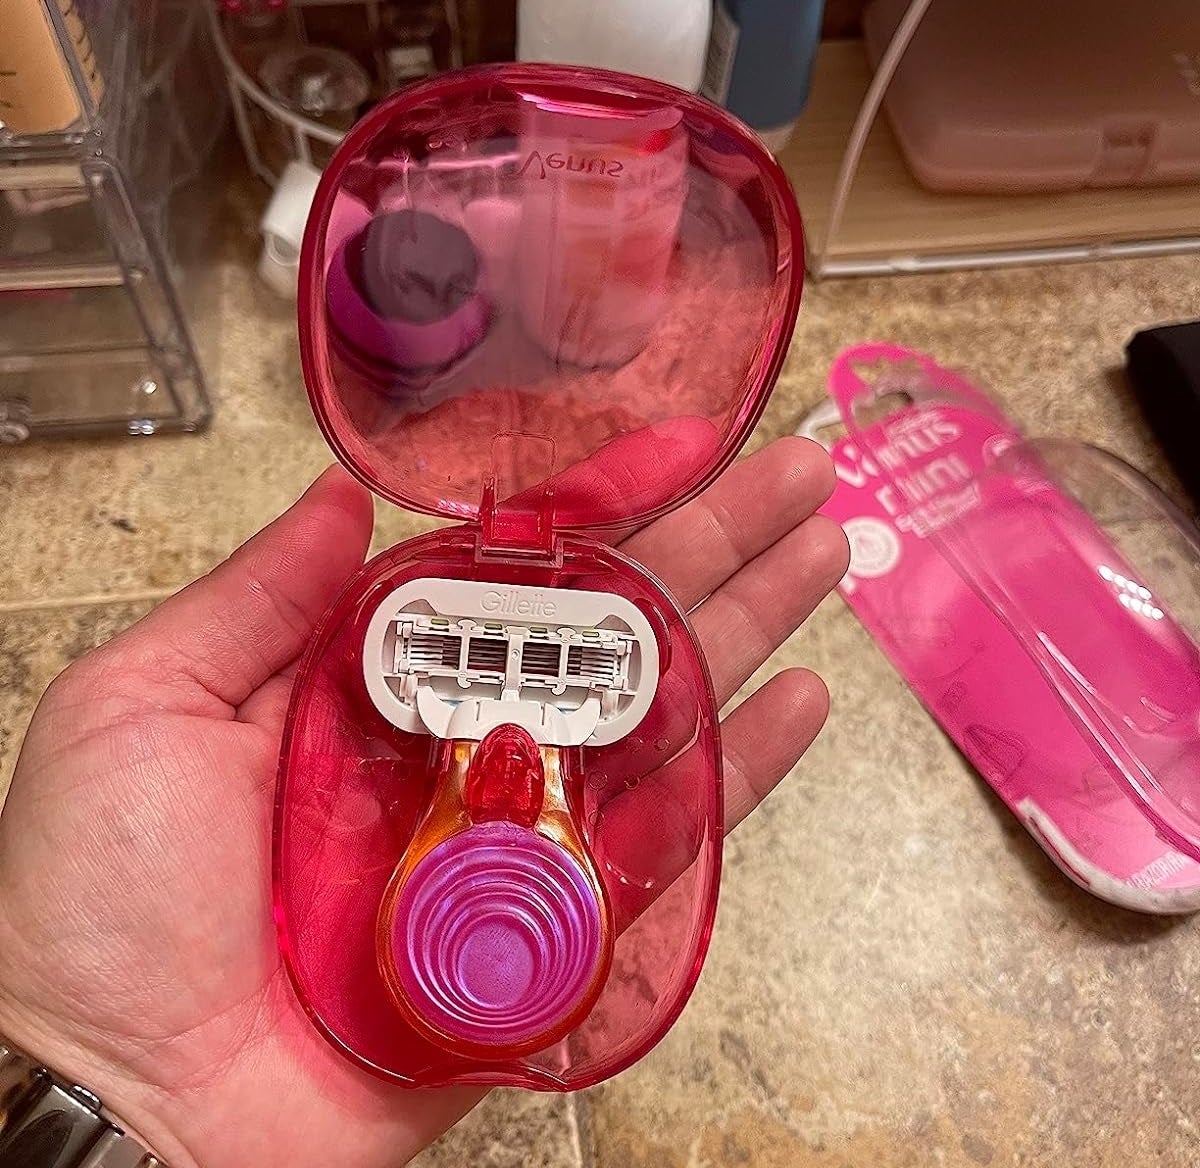 Reviewer’s photo of pink venus on the go razor in an opened container